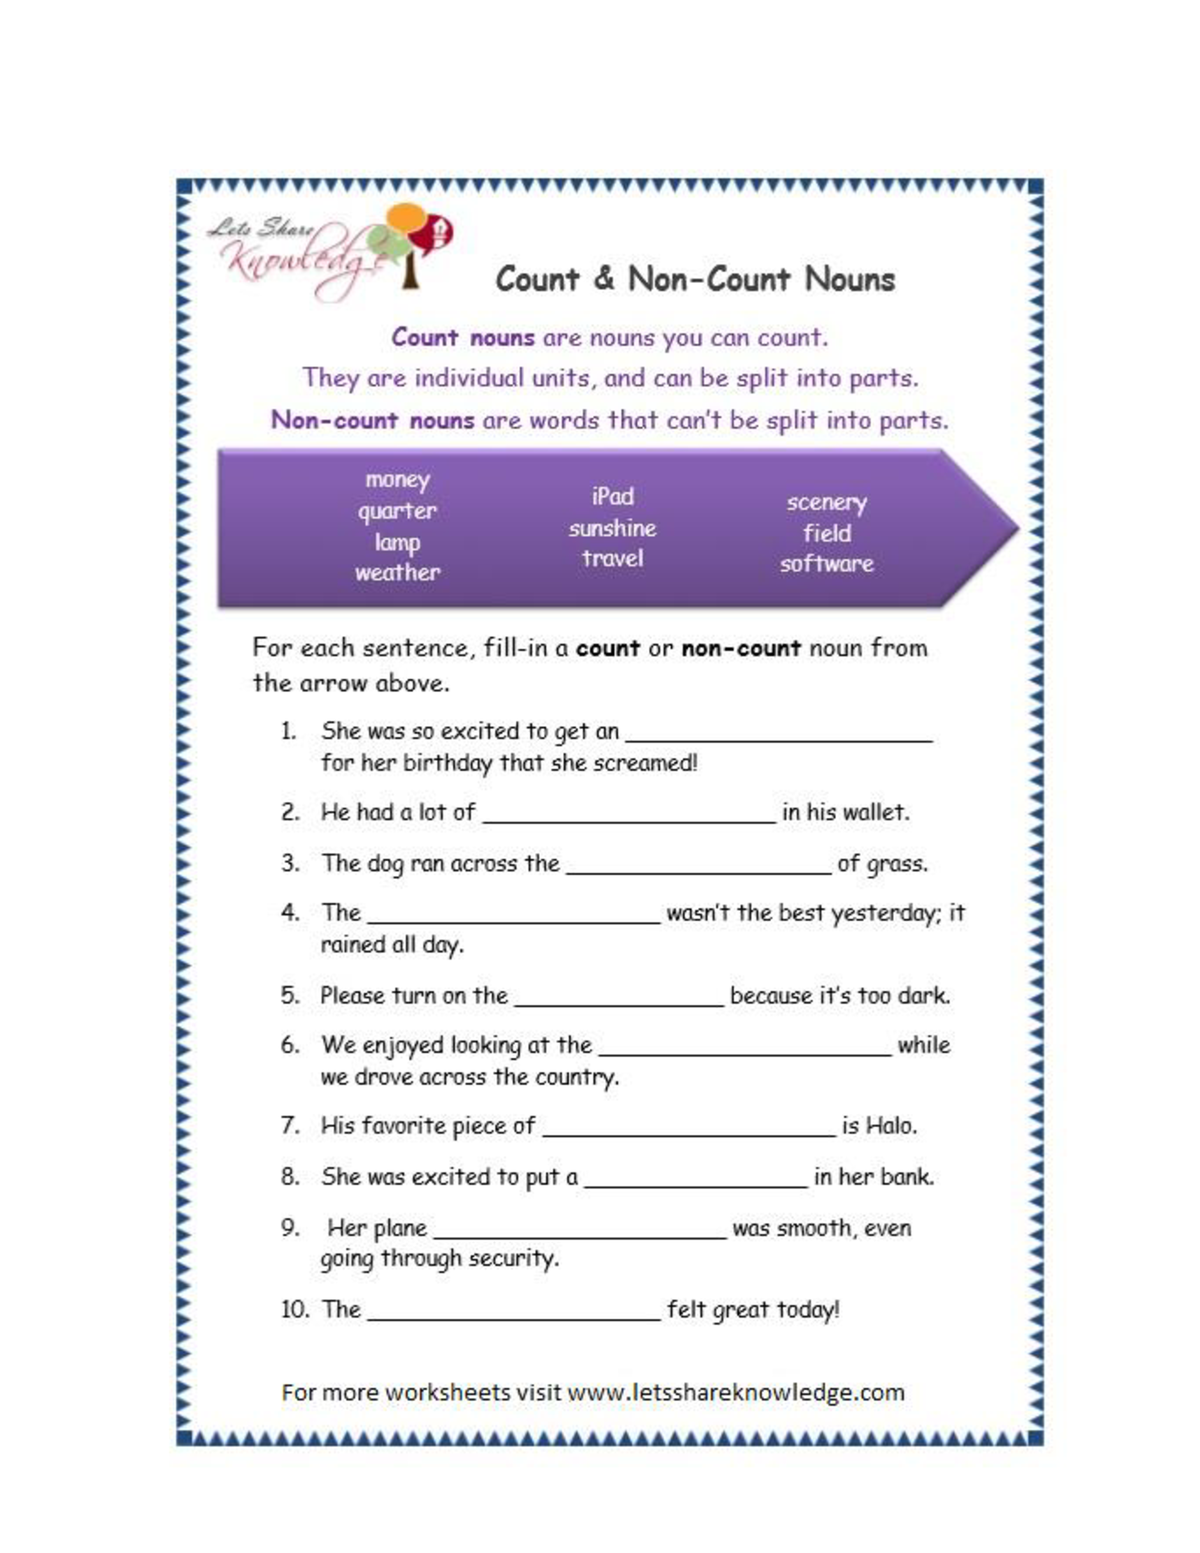 grade-3-worksheets-count-and-noncount-nouns-page-8-education-studocu